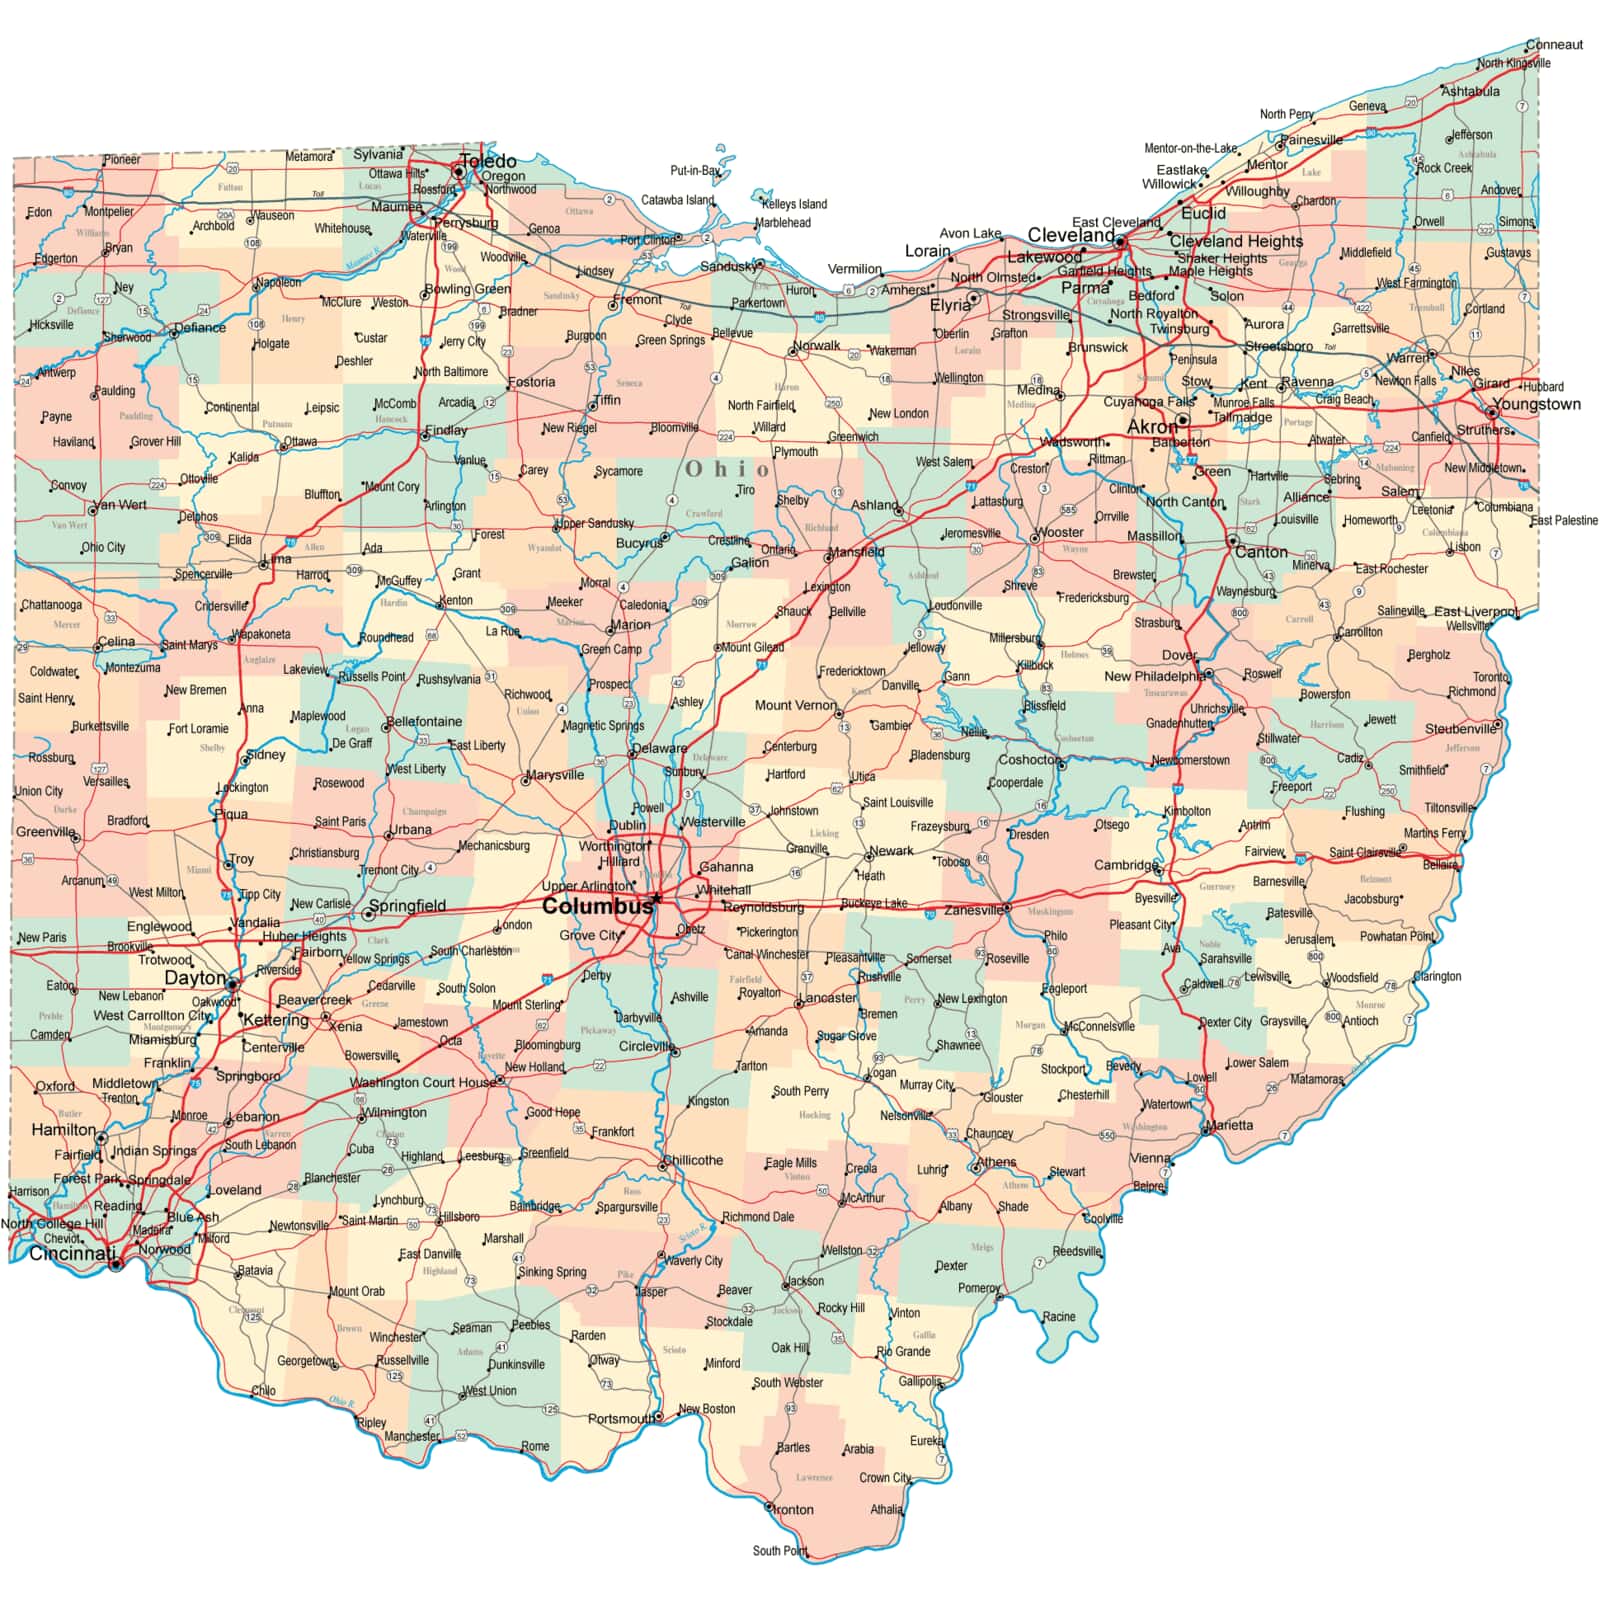 Ohio Road Map Square ?format=jpg&scale.option=fill&scale.width=1600&quality=60